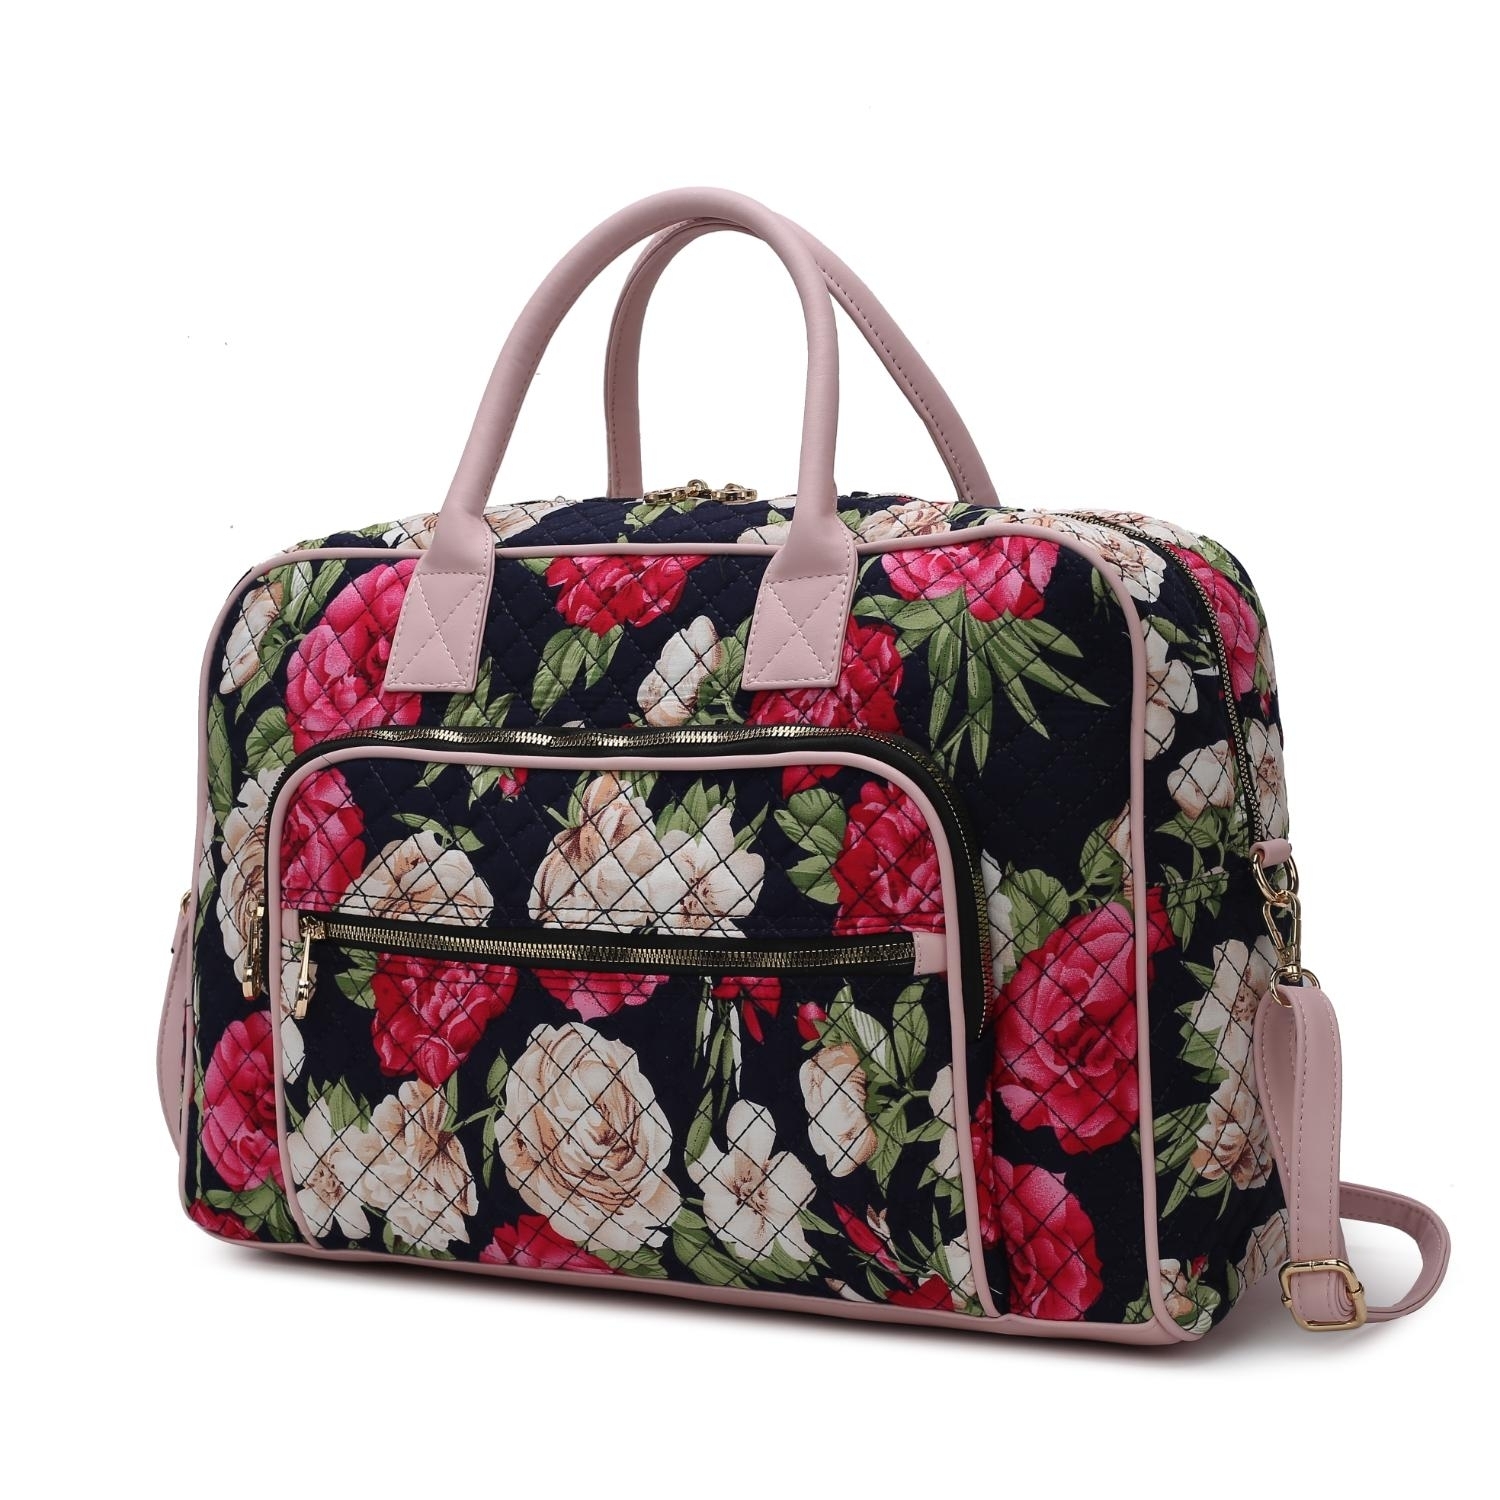 MKF Collection Jayla Quilted Cotton Botanical Pattern Women's Duffle Bag By Mia K - Navy